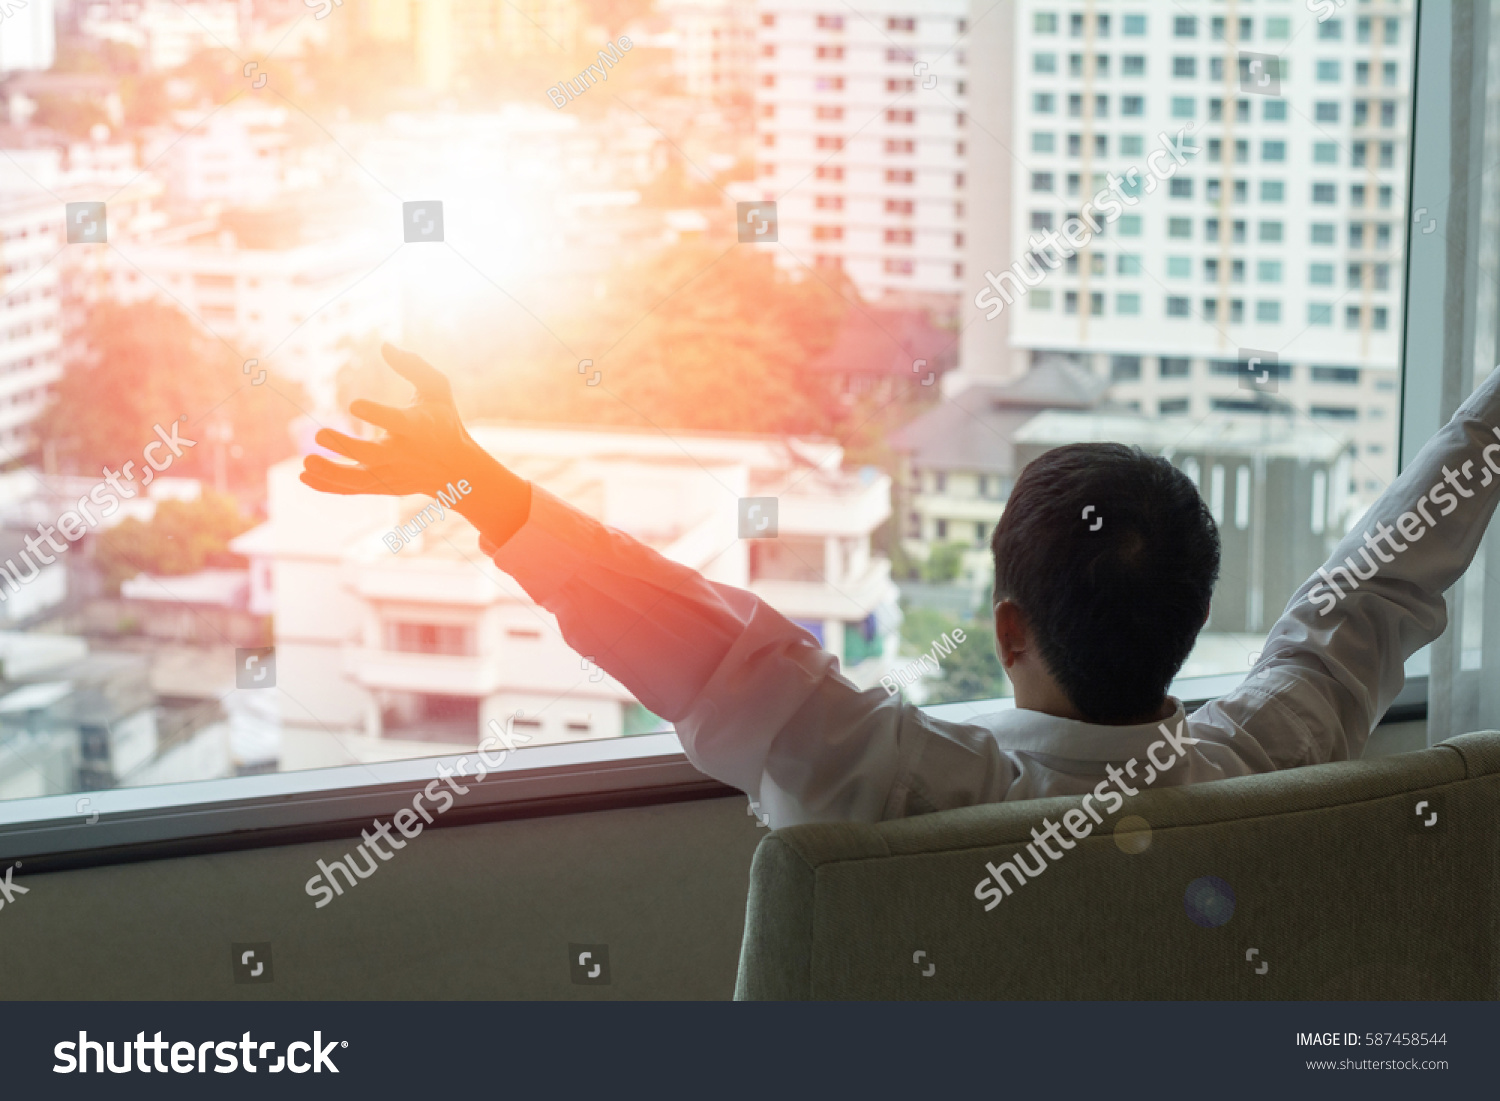 Easy relax business man lifestyle at home sitting on modern chair in living room looking out of window toward beautiful cityscape downtown urban landscape city life w/ sunlight effect: happy people #587458544